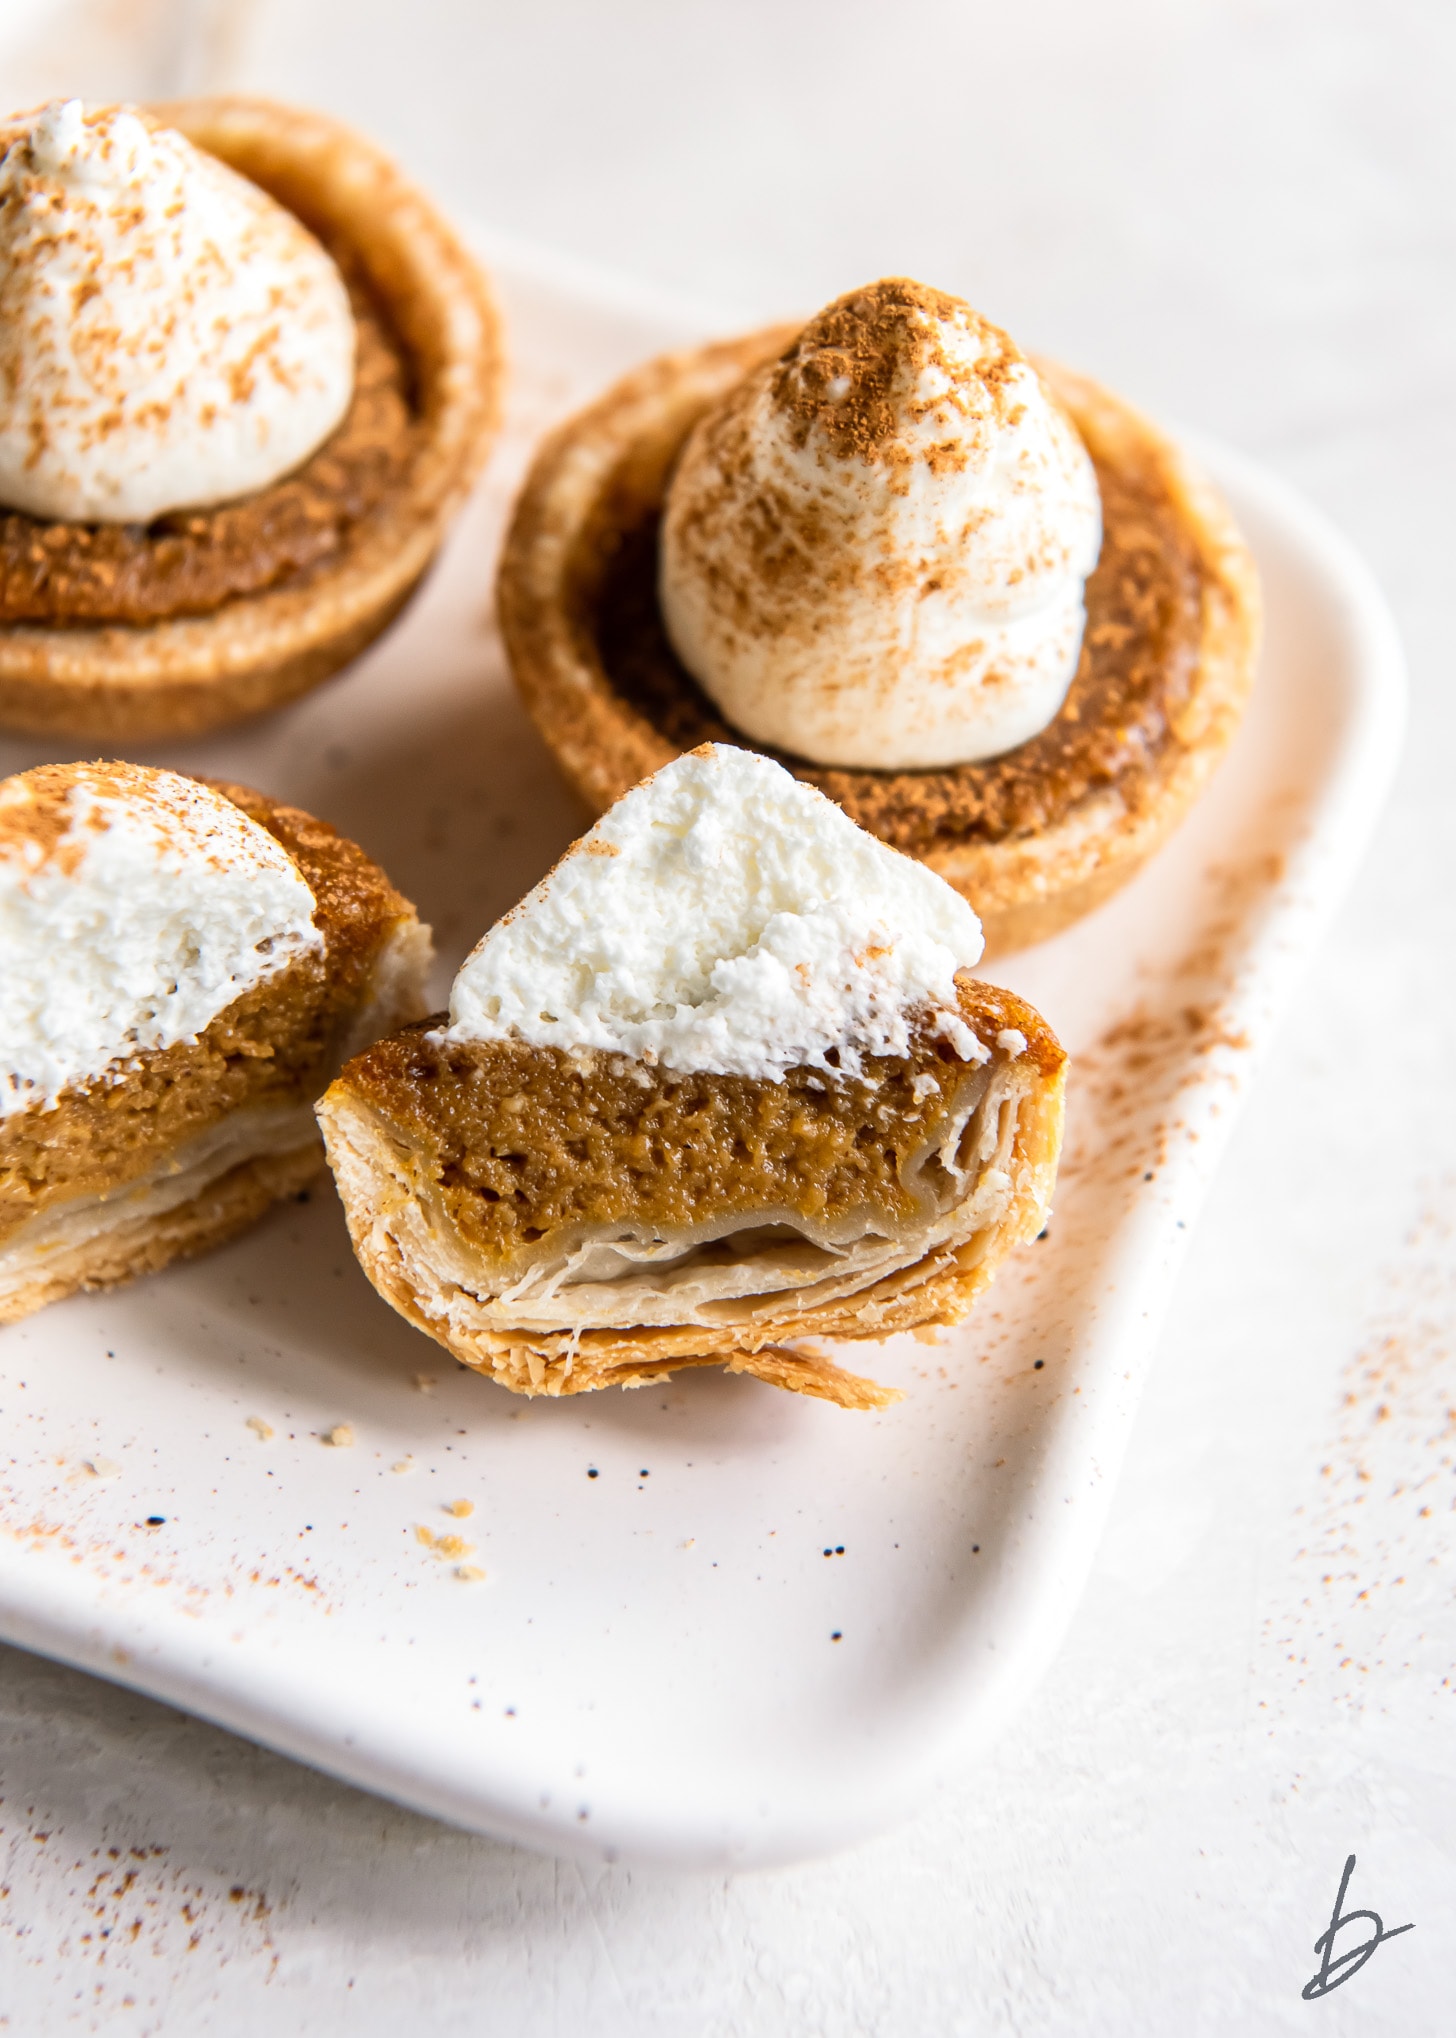 mini pumpkin pie with whipped cream cut in half to show filling and flaky crust.